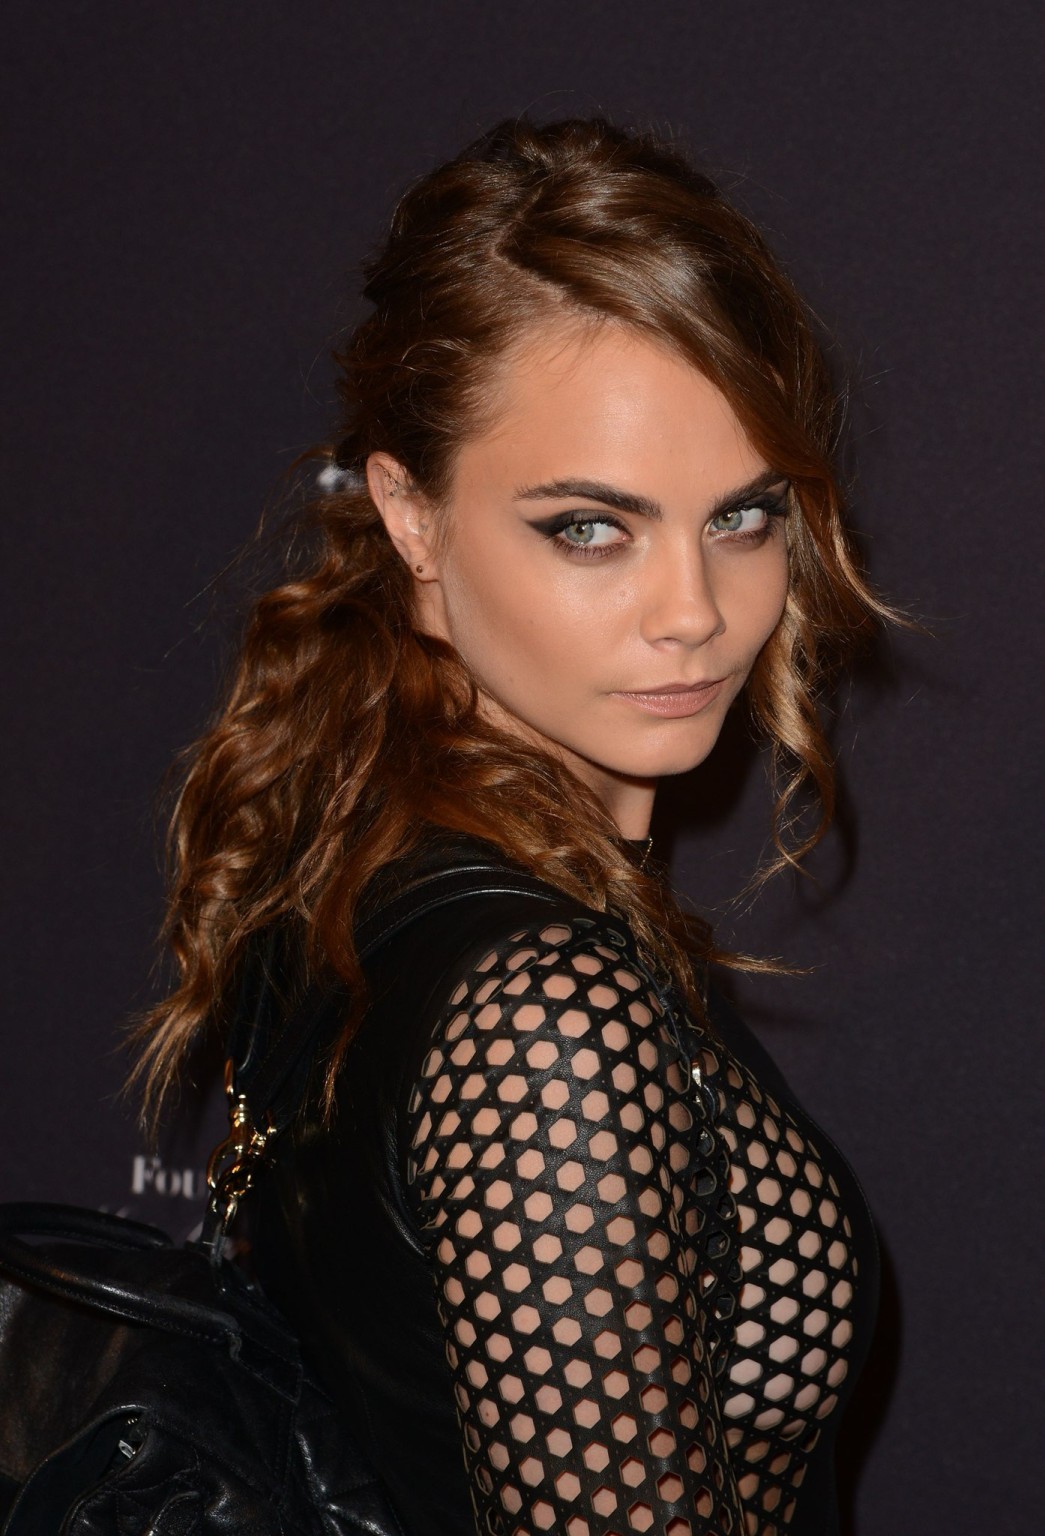 Cara Delevingne shows sideboobs wearing a partially see through leather dress at #75175776